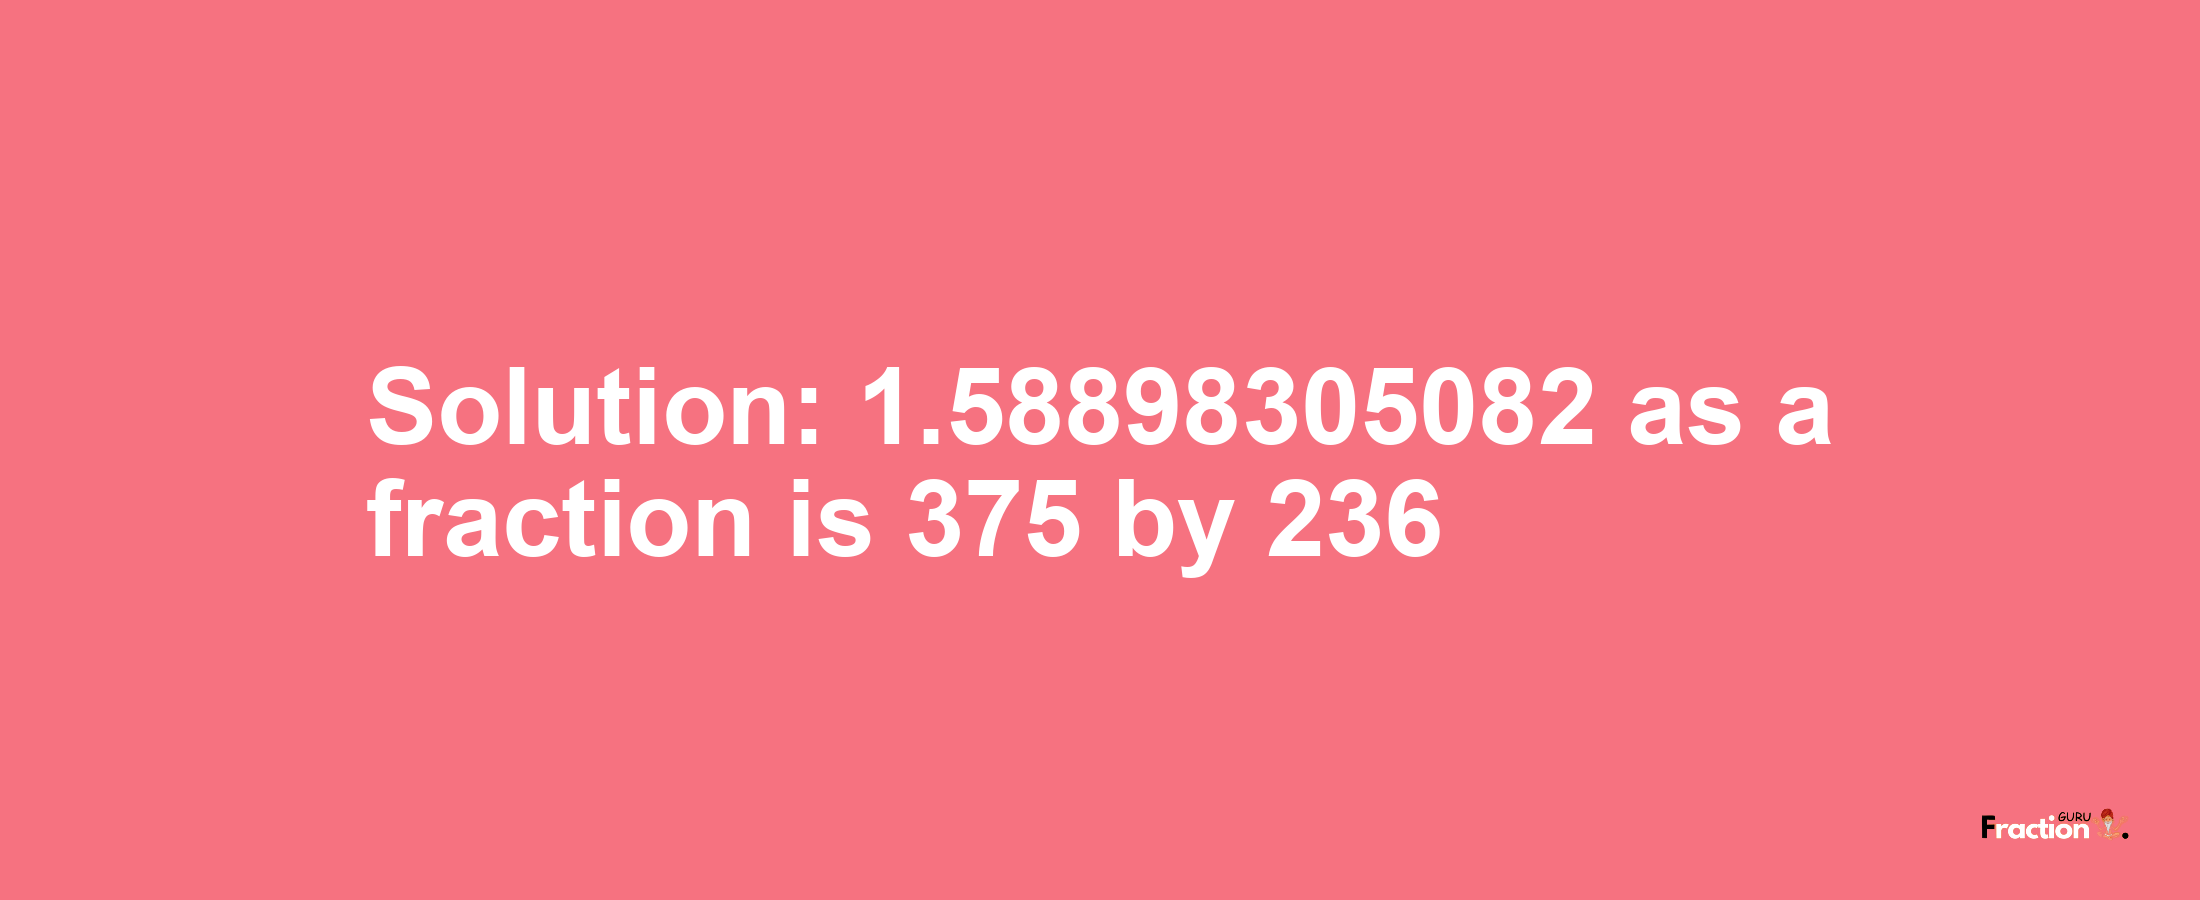 Solution:1.58898305082 as a fraction is 375/236